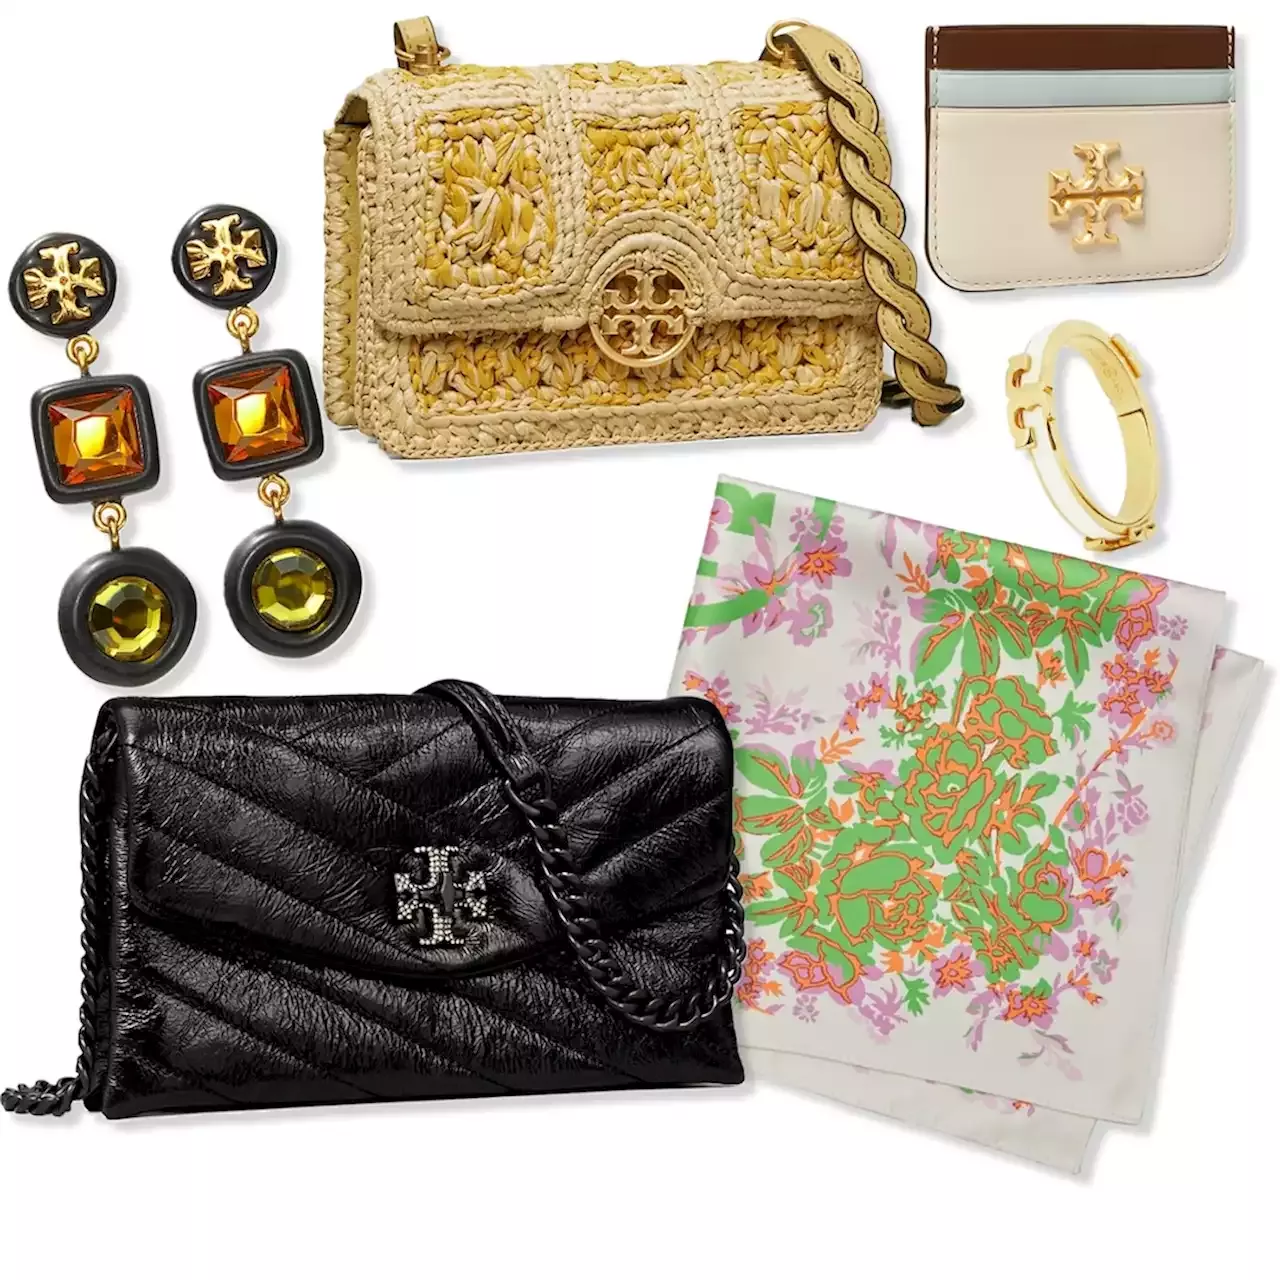 Tory Burch Has Hundreds of New Sale Styles— Here Are the Cutest Bags,  Jewelry & More